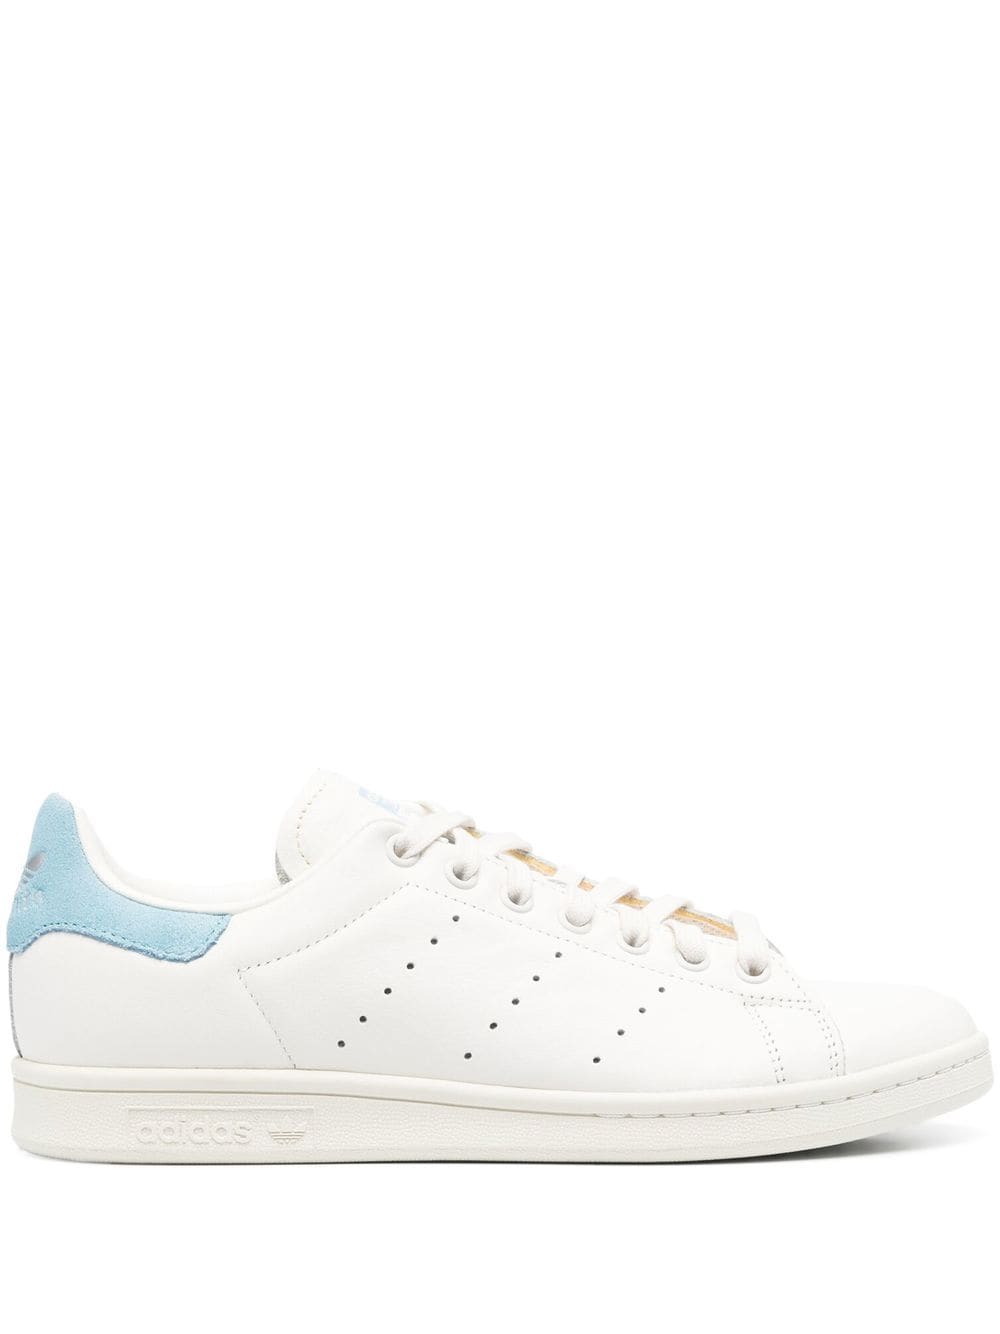 ADIDAS ORIGINALS PERFORATED LOW-TOP LEATHER SNEAKERS